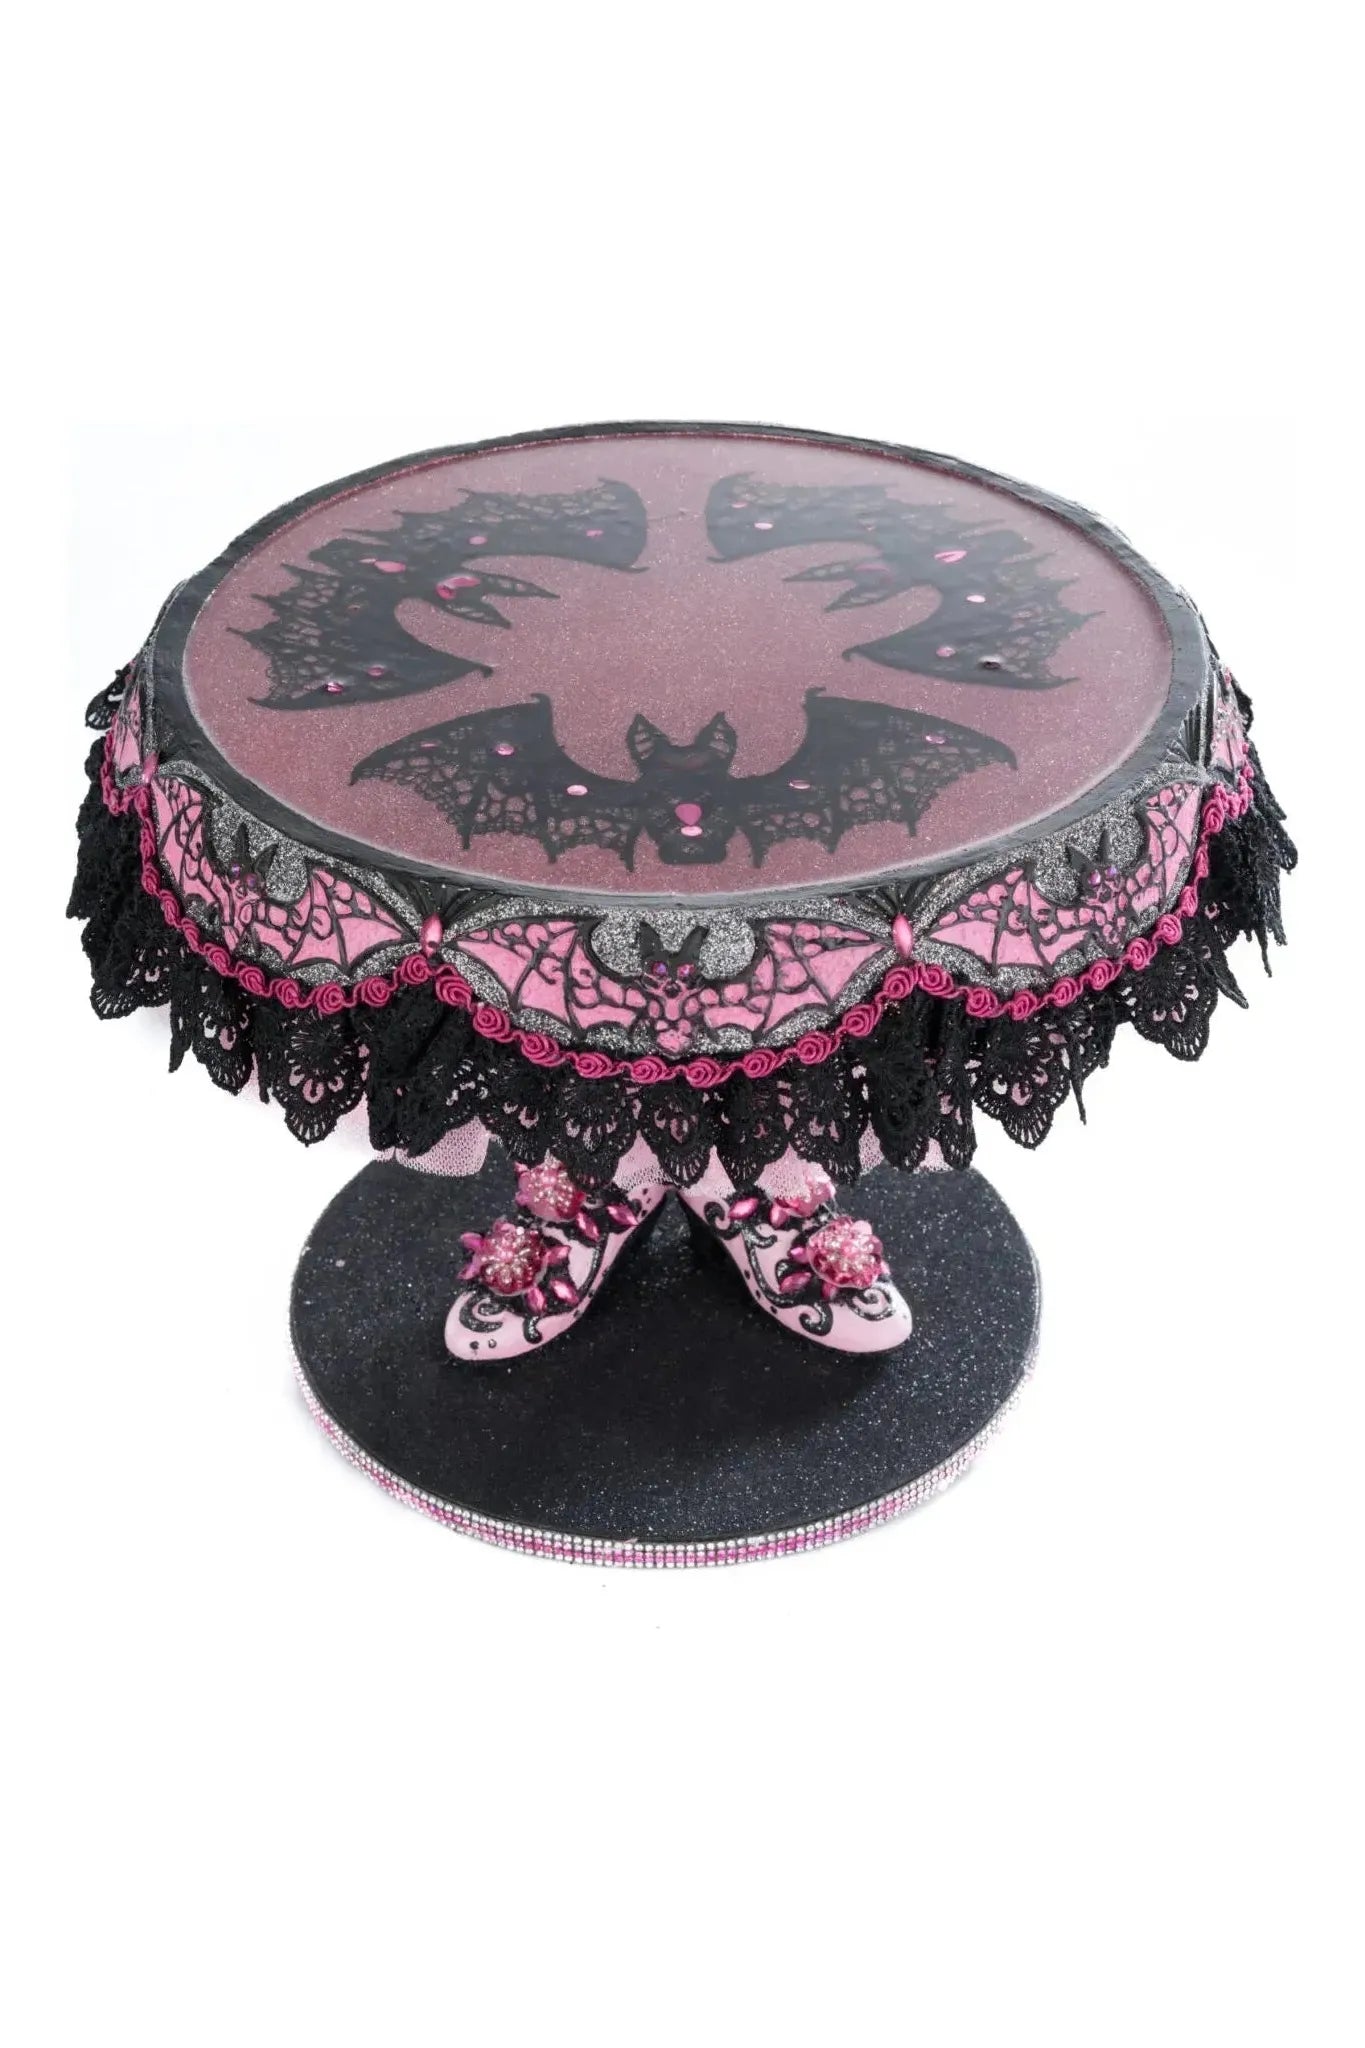 Shop For Pink Panic Possession Witch Boots Cake Plate 28-428142